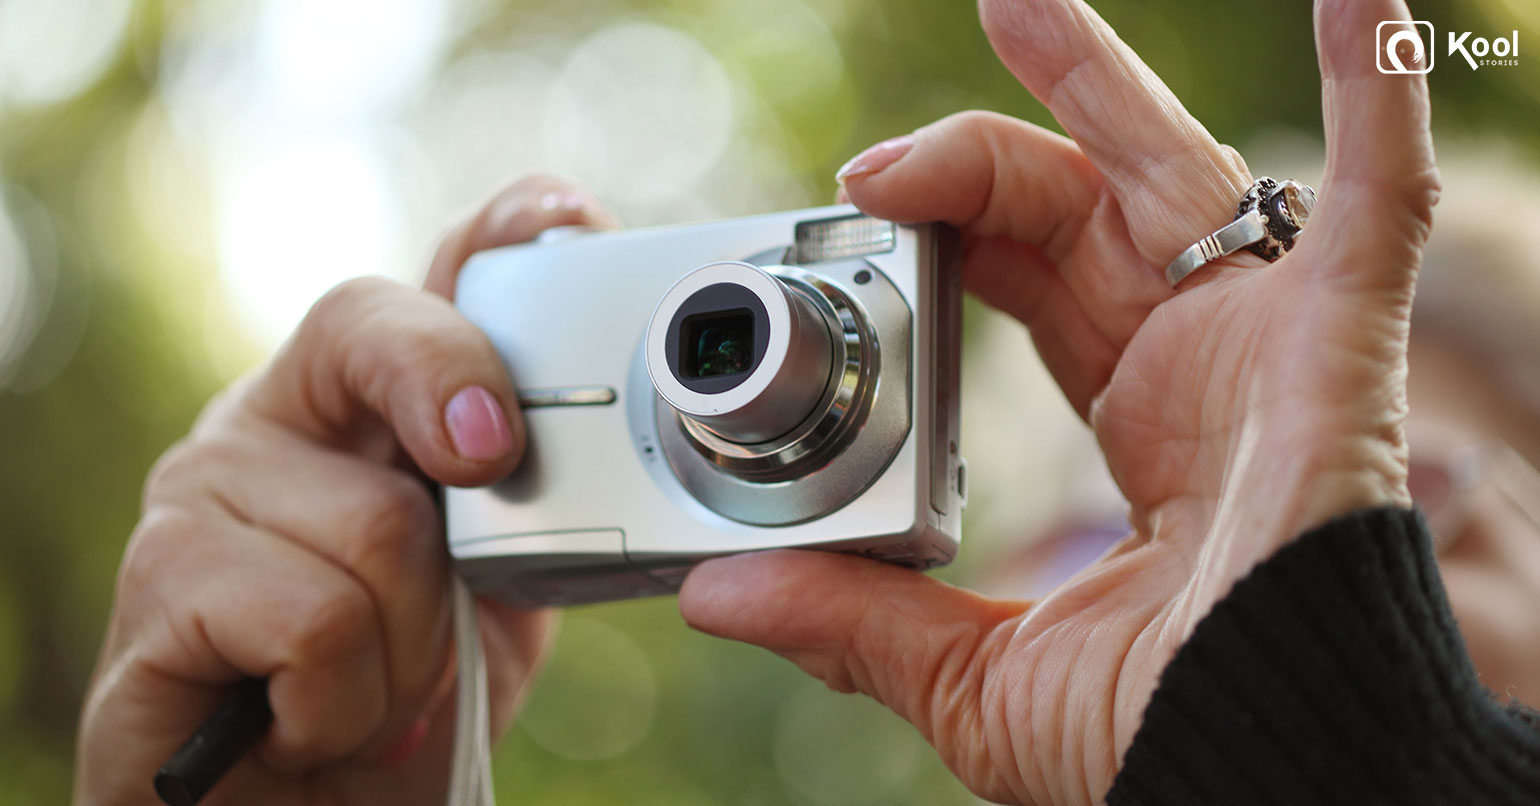 Types of Cameras - Point-and-shoot cameras